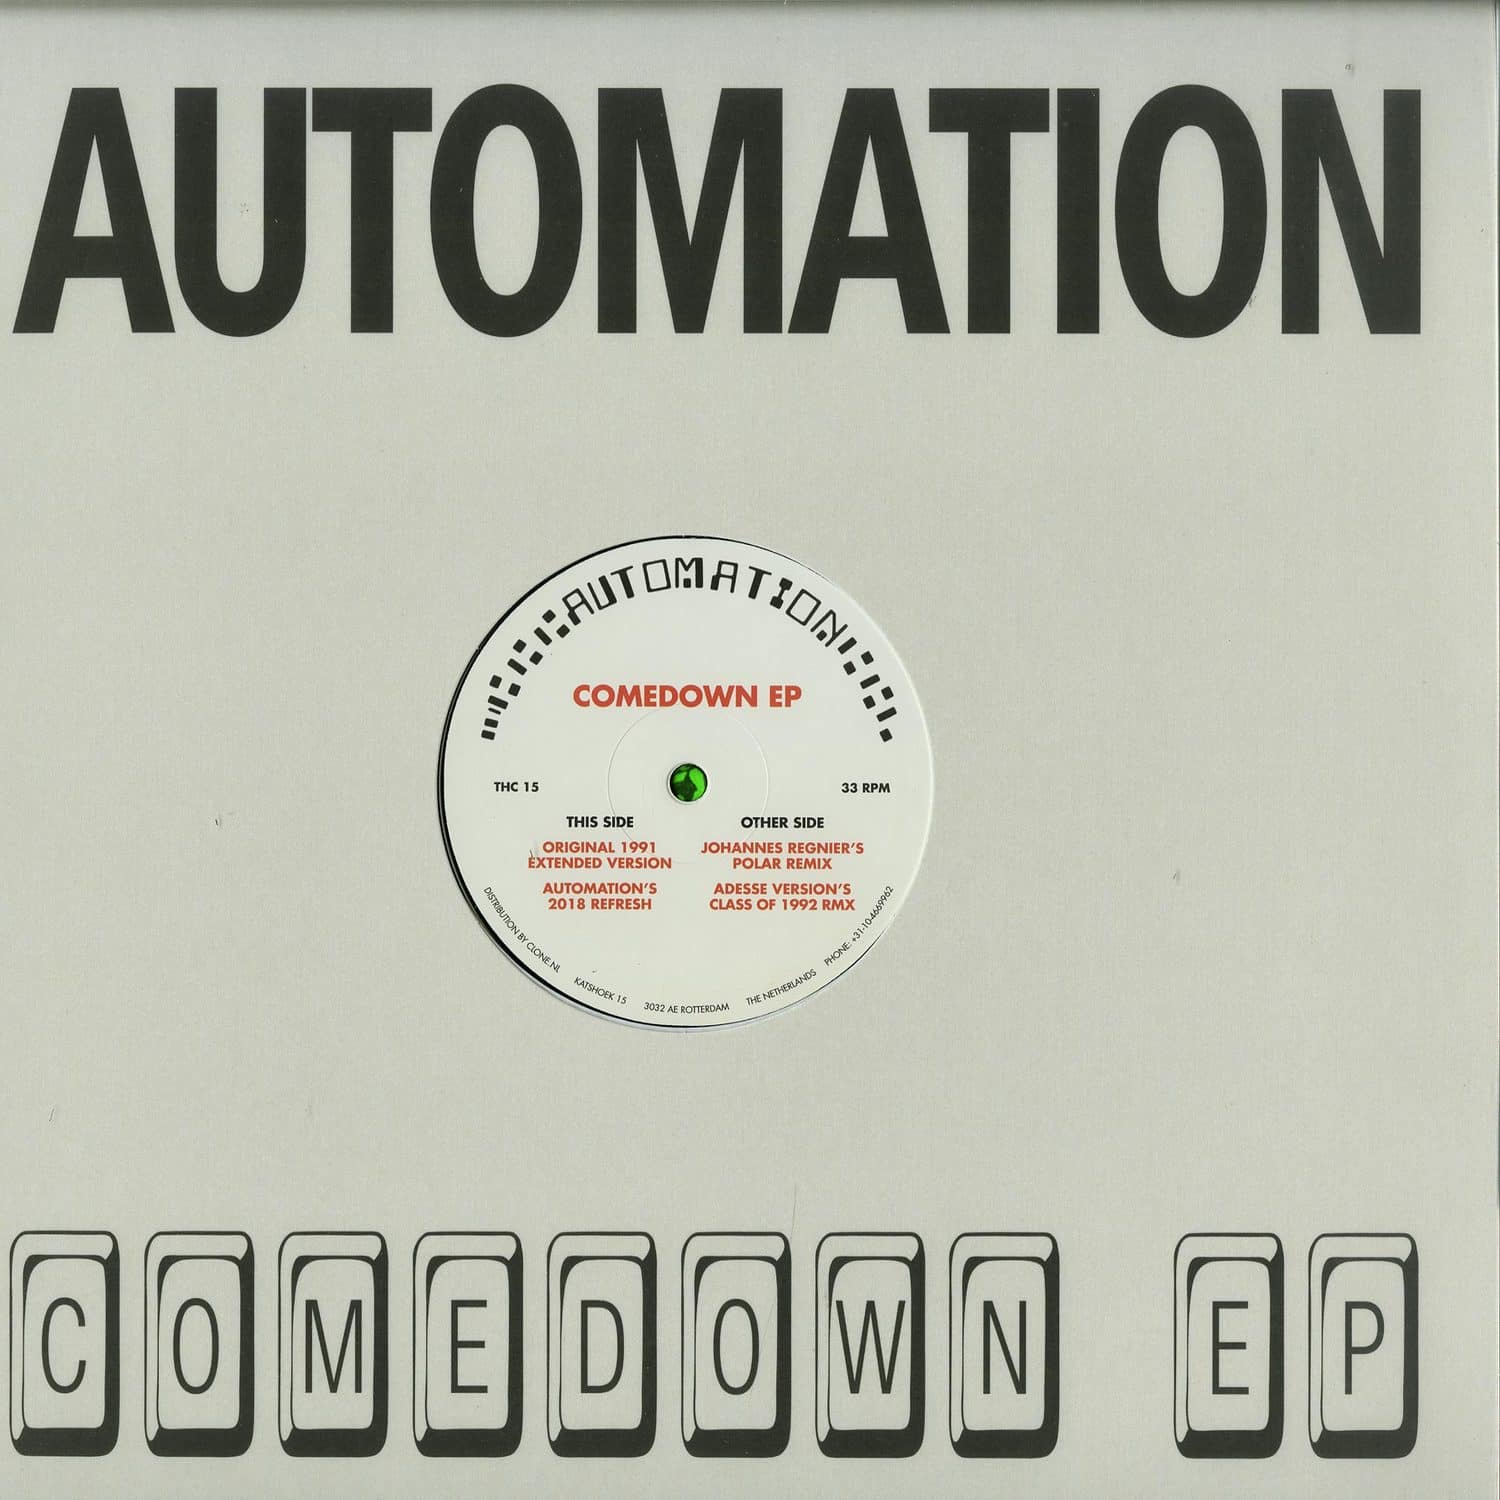 Automation - COMEDOWN